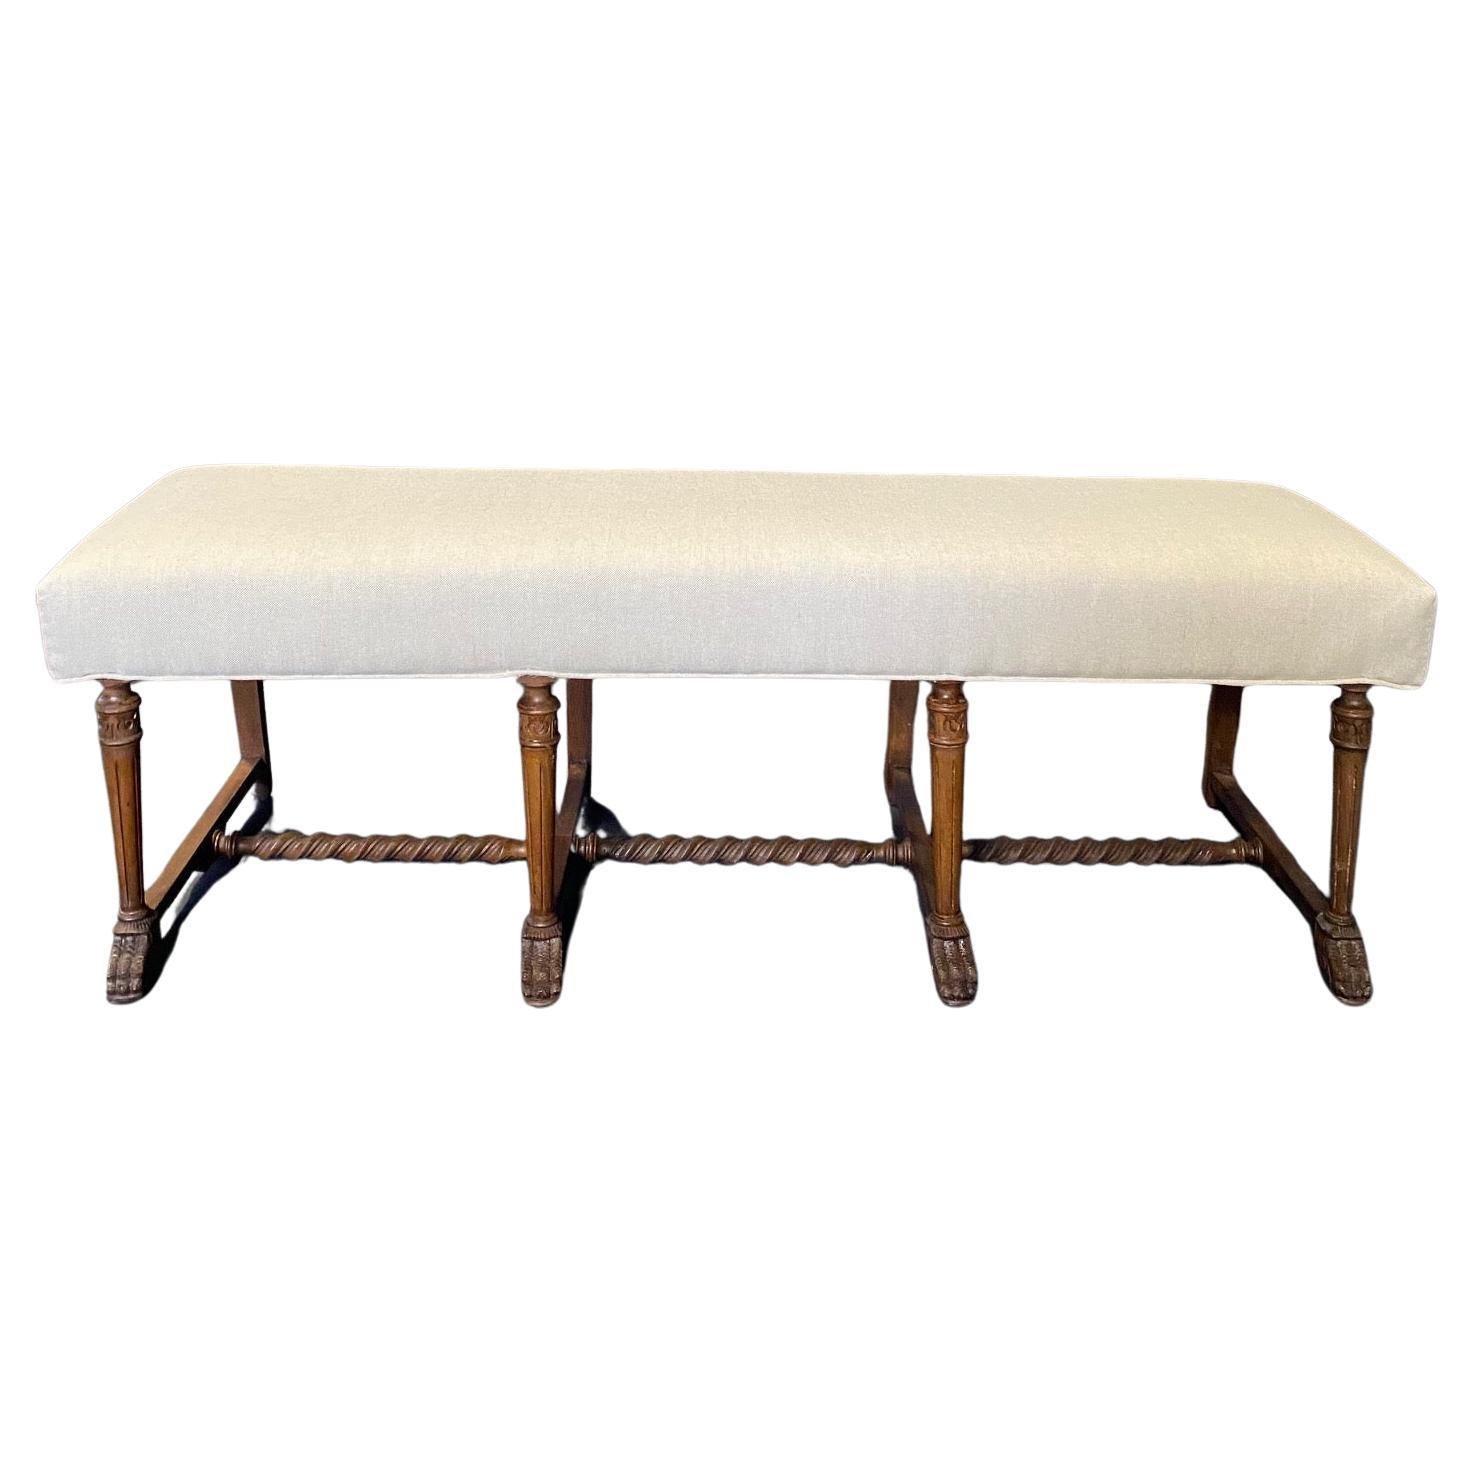 Elegant French Antique Carved Barley Twist Bench with Carved Feet